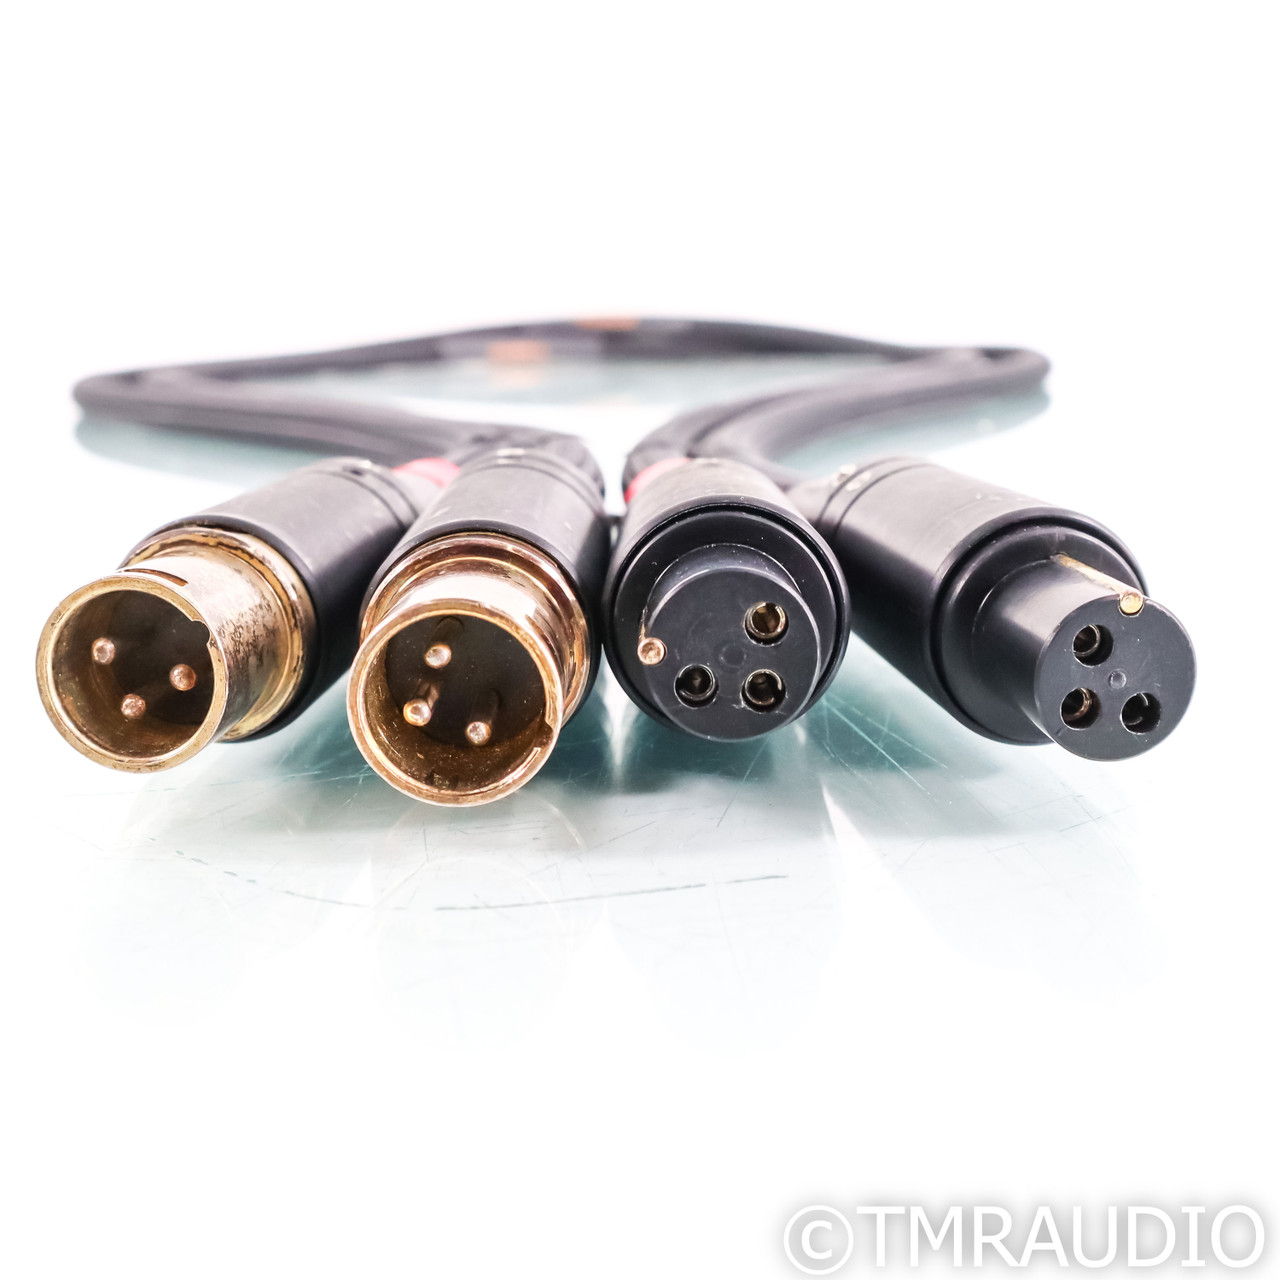 Cable Research Lab Bronze XLR Cables; 2m Pair Balanced ... 4